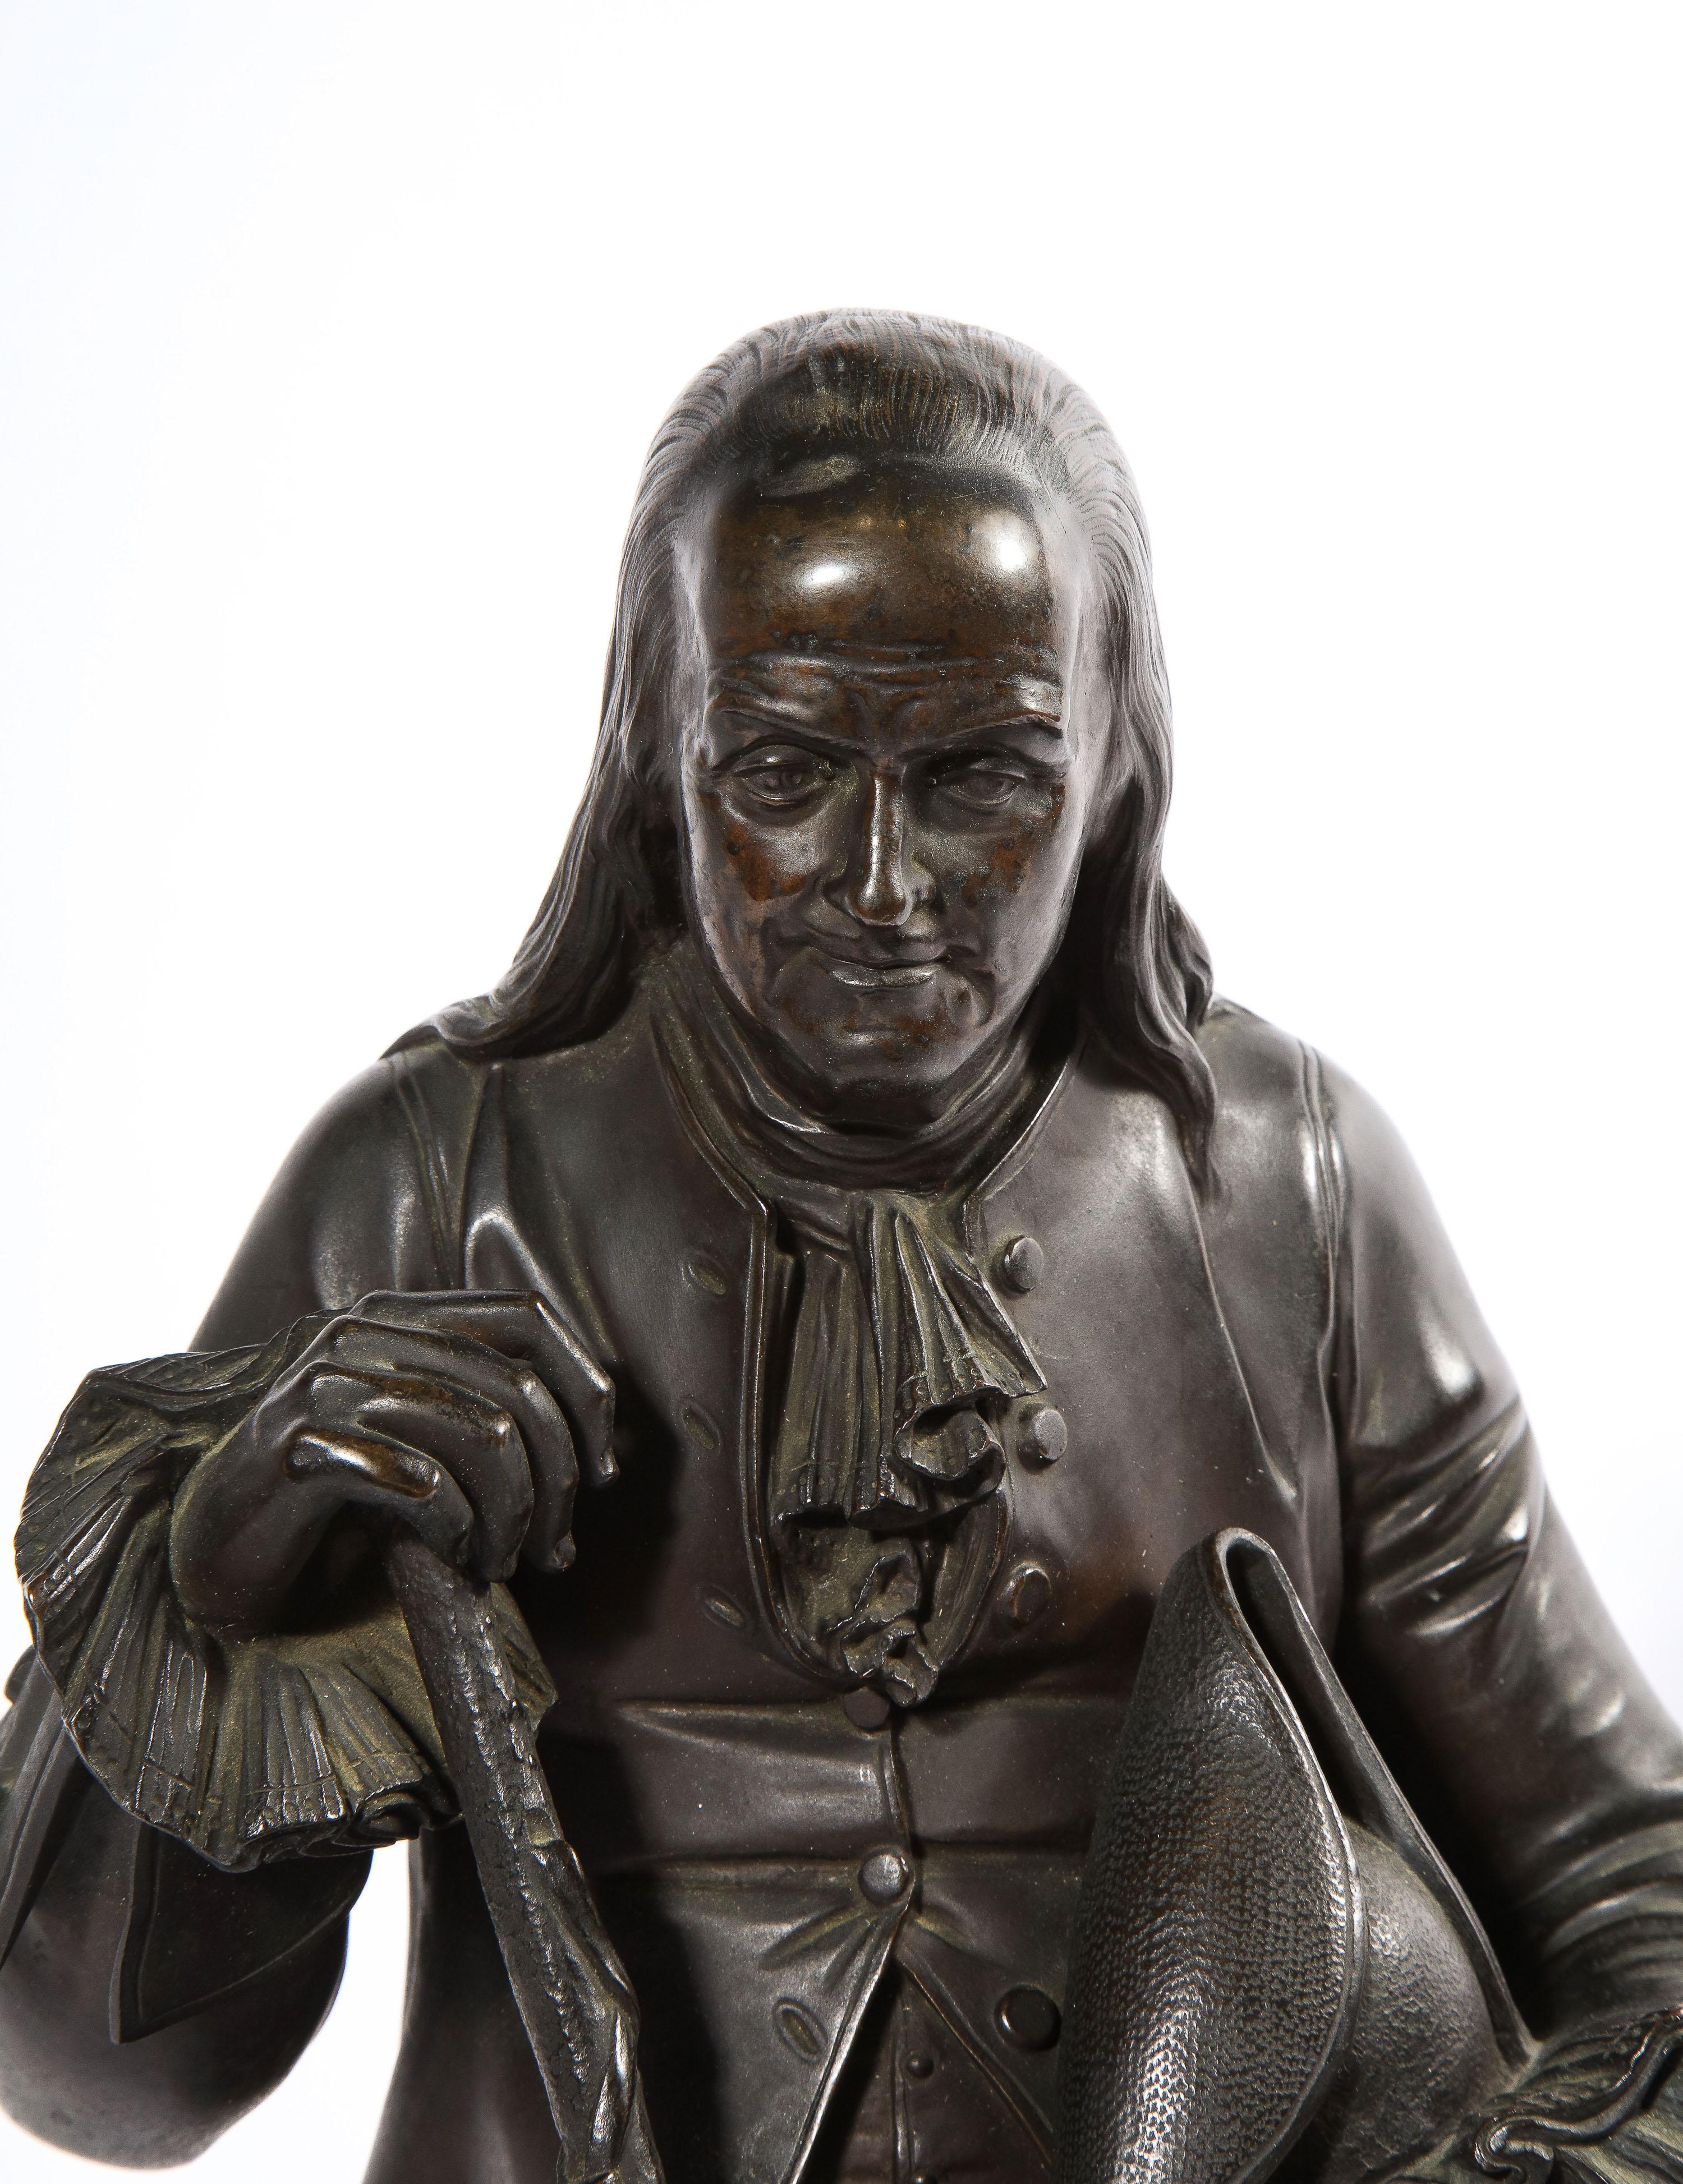 Rare Patinated Bronze Sculpture of Benjamin Franklin, by A. Carrier-Belleuse - Gold Figurative Sculpture by Albert-Ernest Carrier-Belleuse